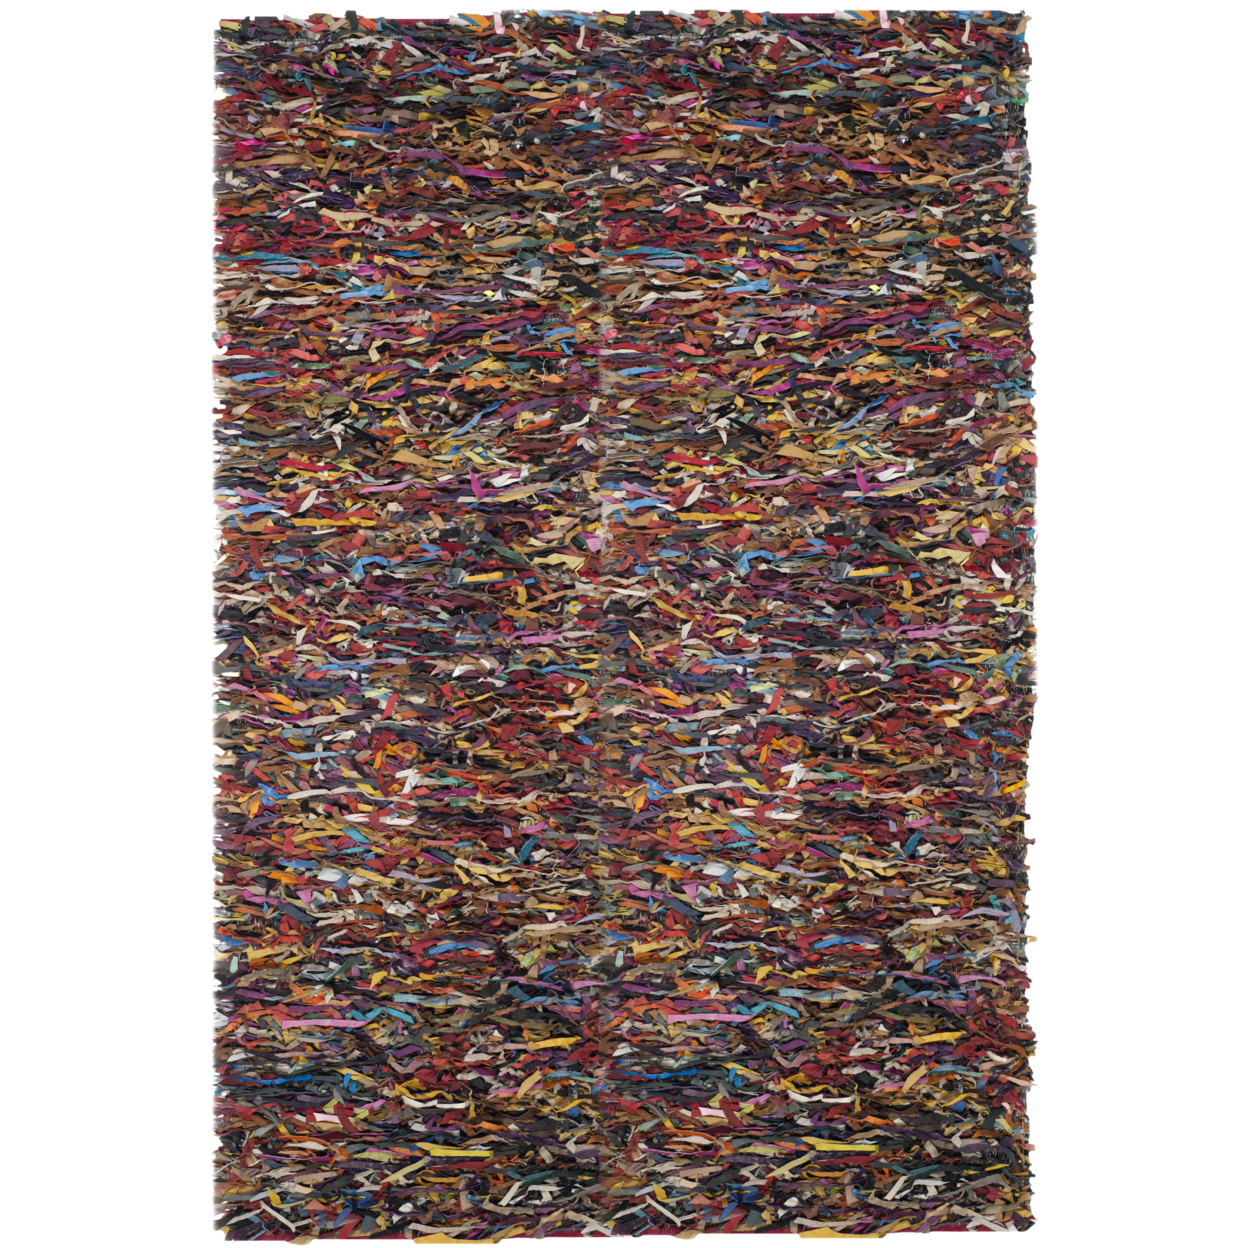 SAFAVIEH Leather Shag LSG511M Hand-knotted Multi Rug - 6' X 9'